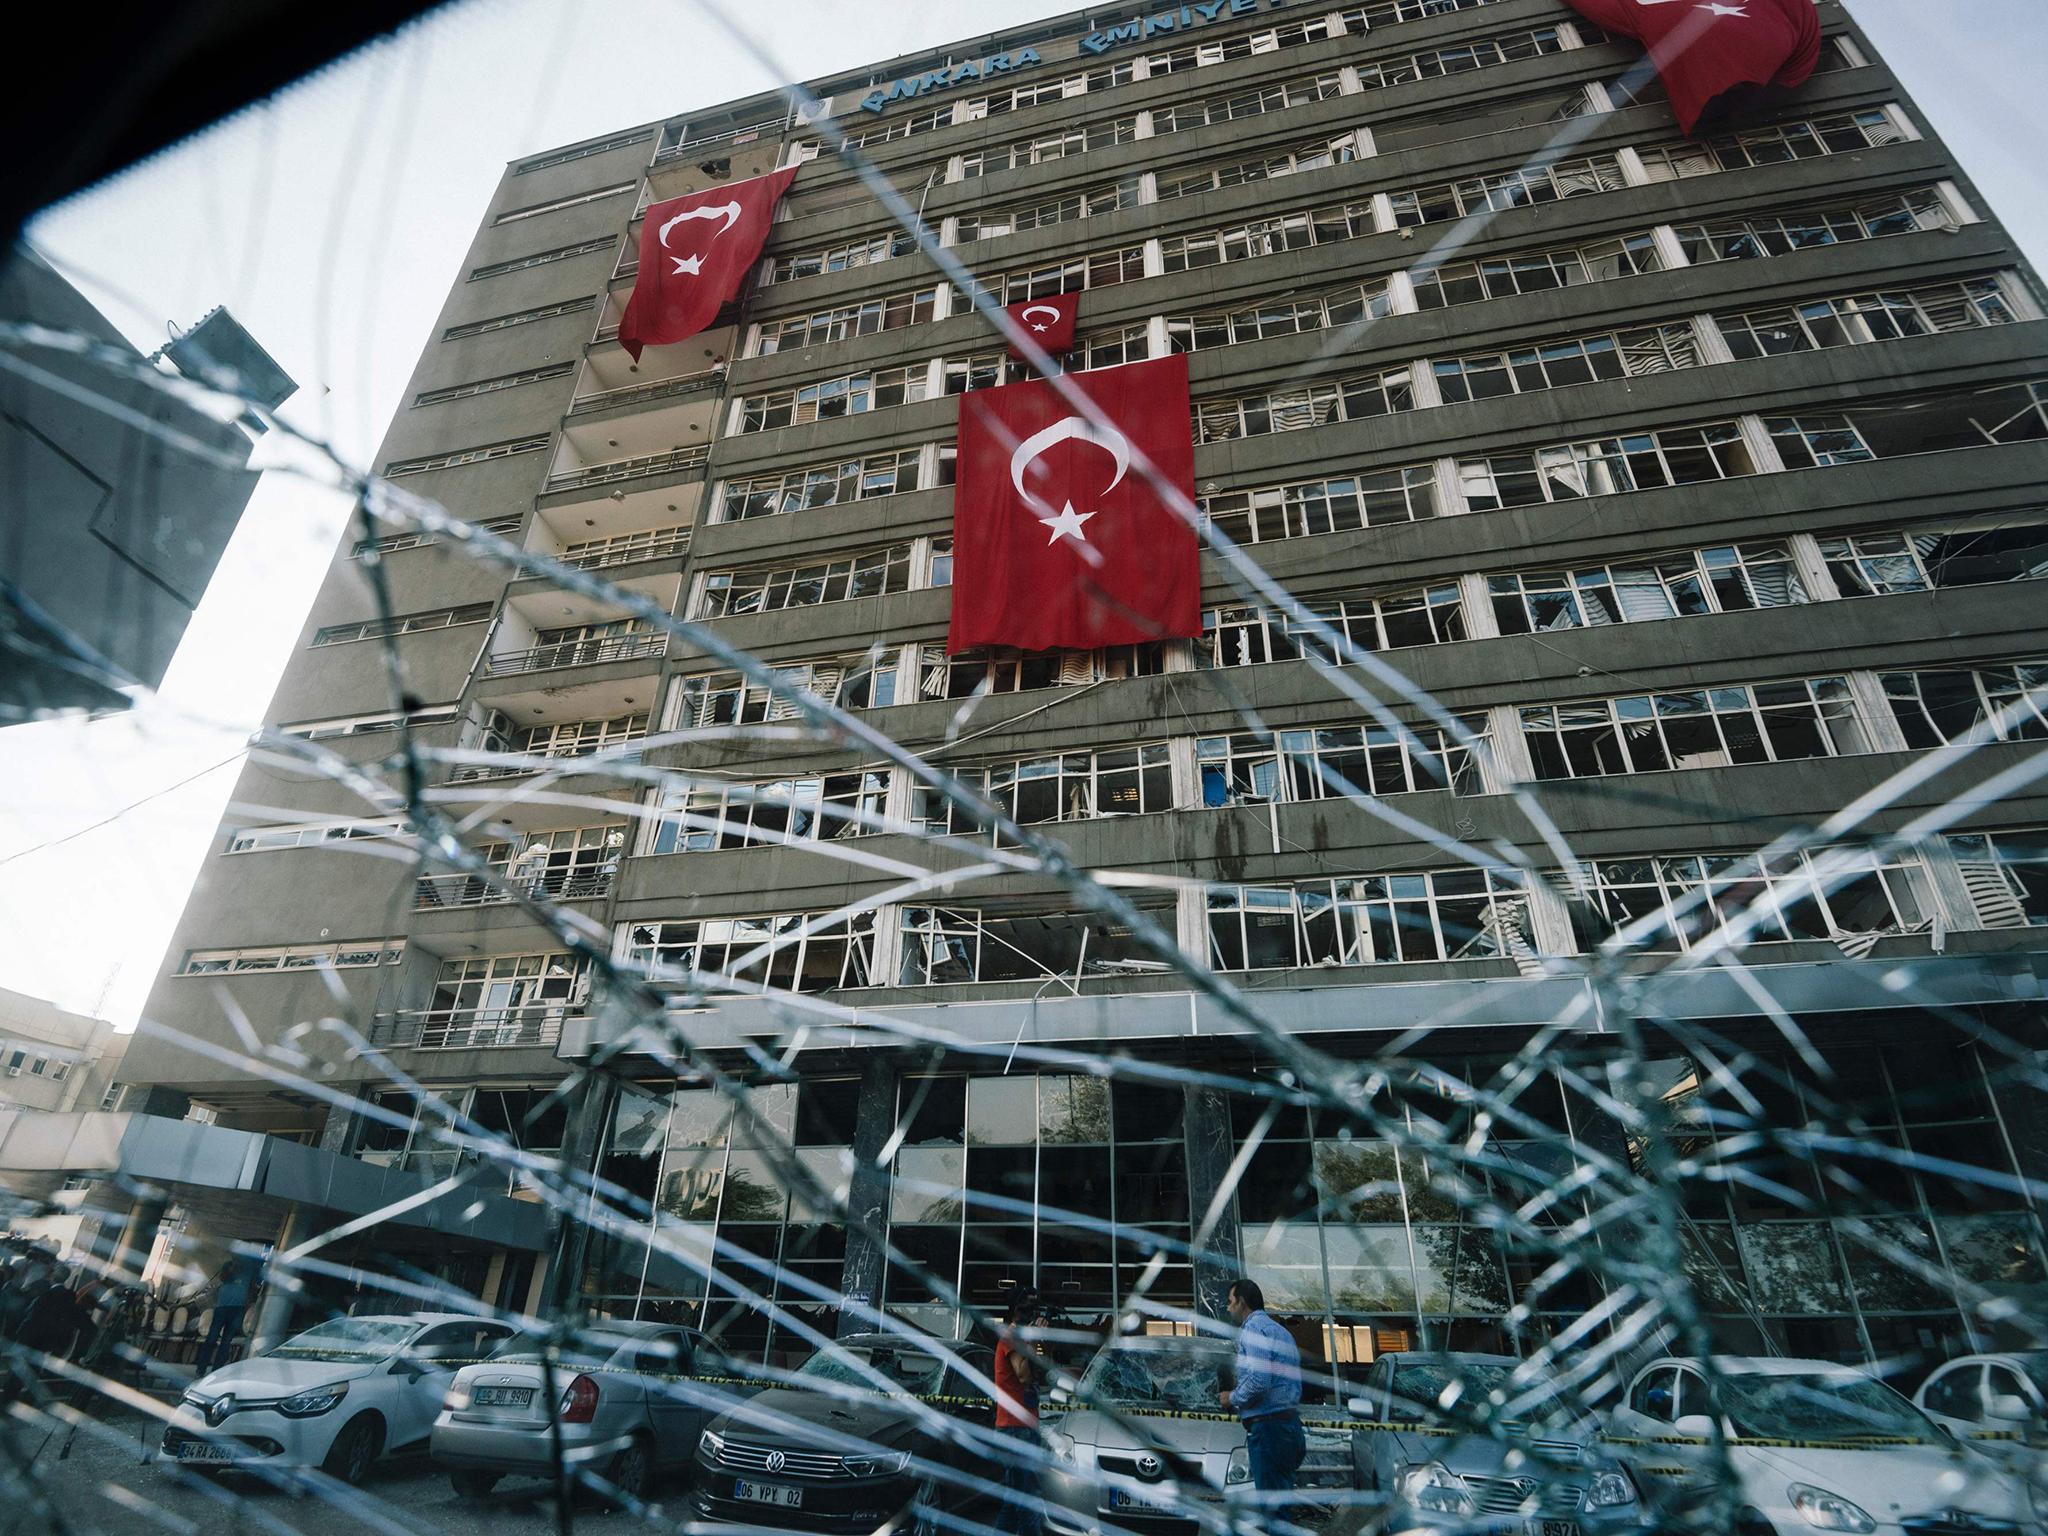 Turkish flags hanging from the facade of the damaged Ankara police headquarters after it was bombed during the failed 15 July coup attempt